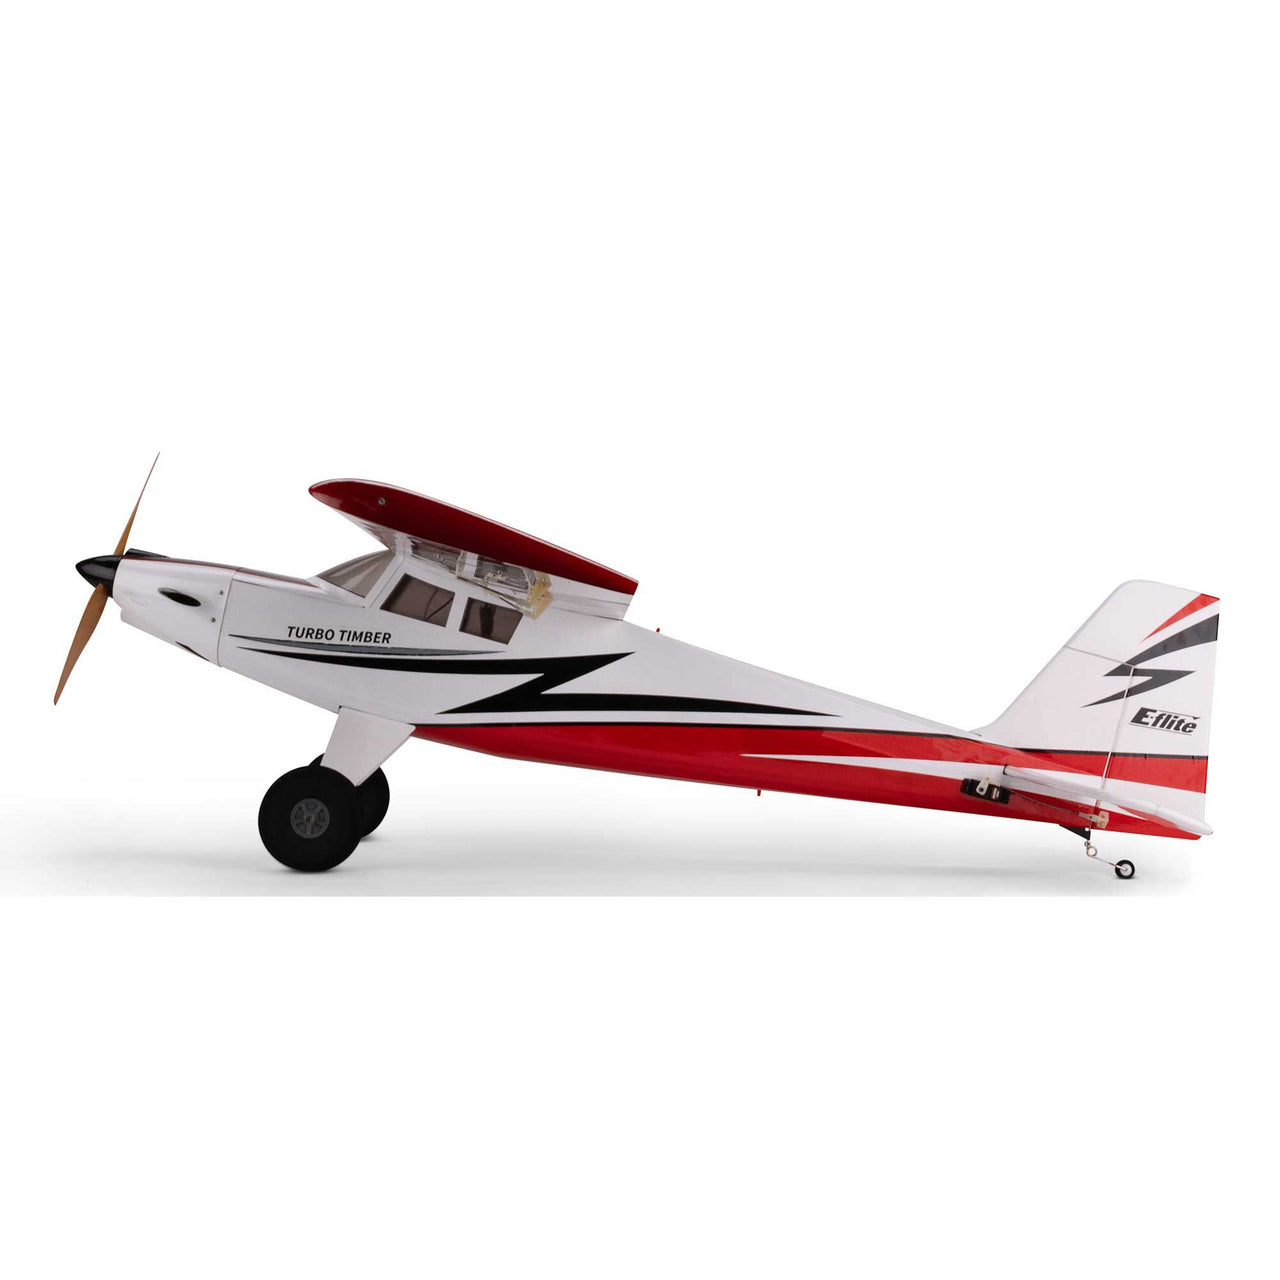 EFL71750 E-Flite Turbo Timber SWS 2,0 m BNF Basic con AS3X y SAFE Select 